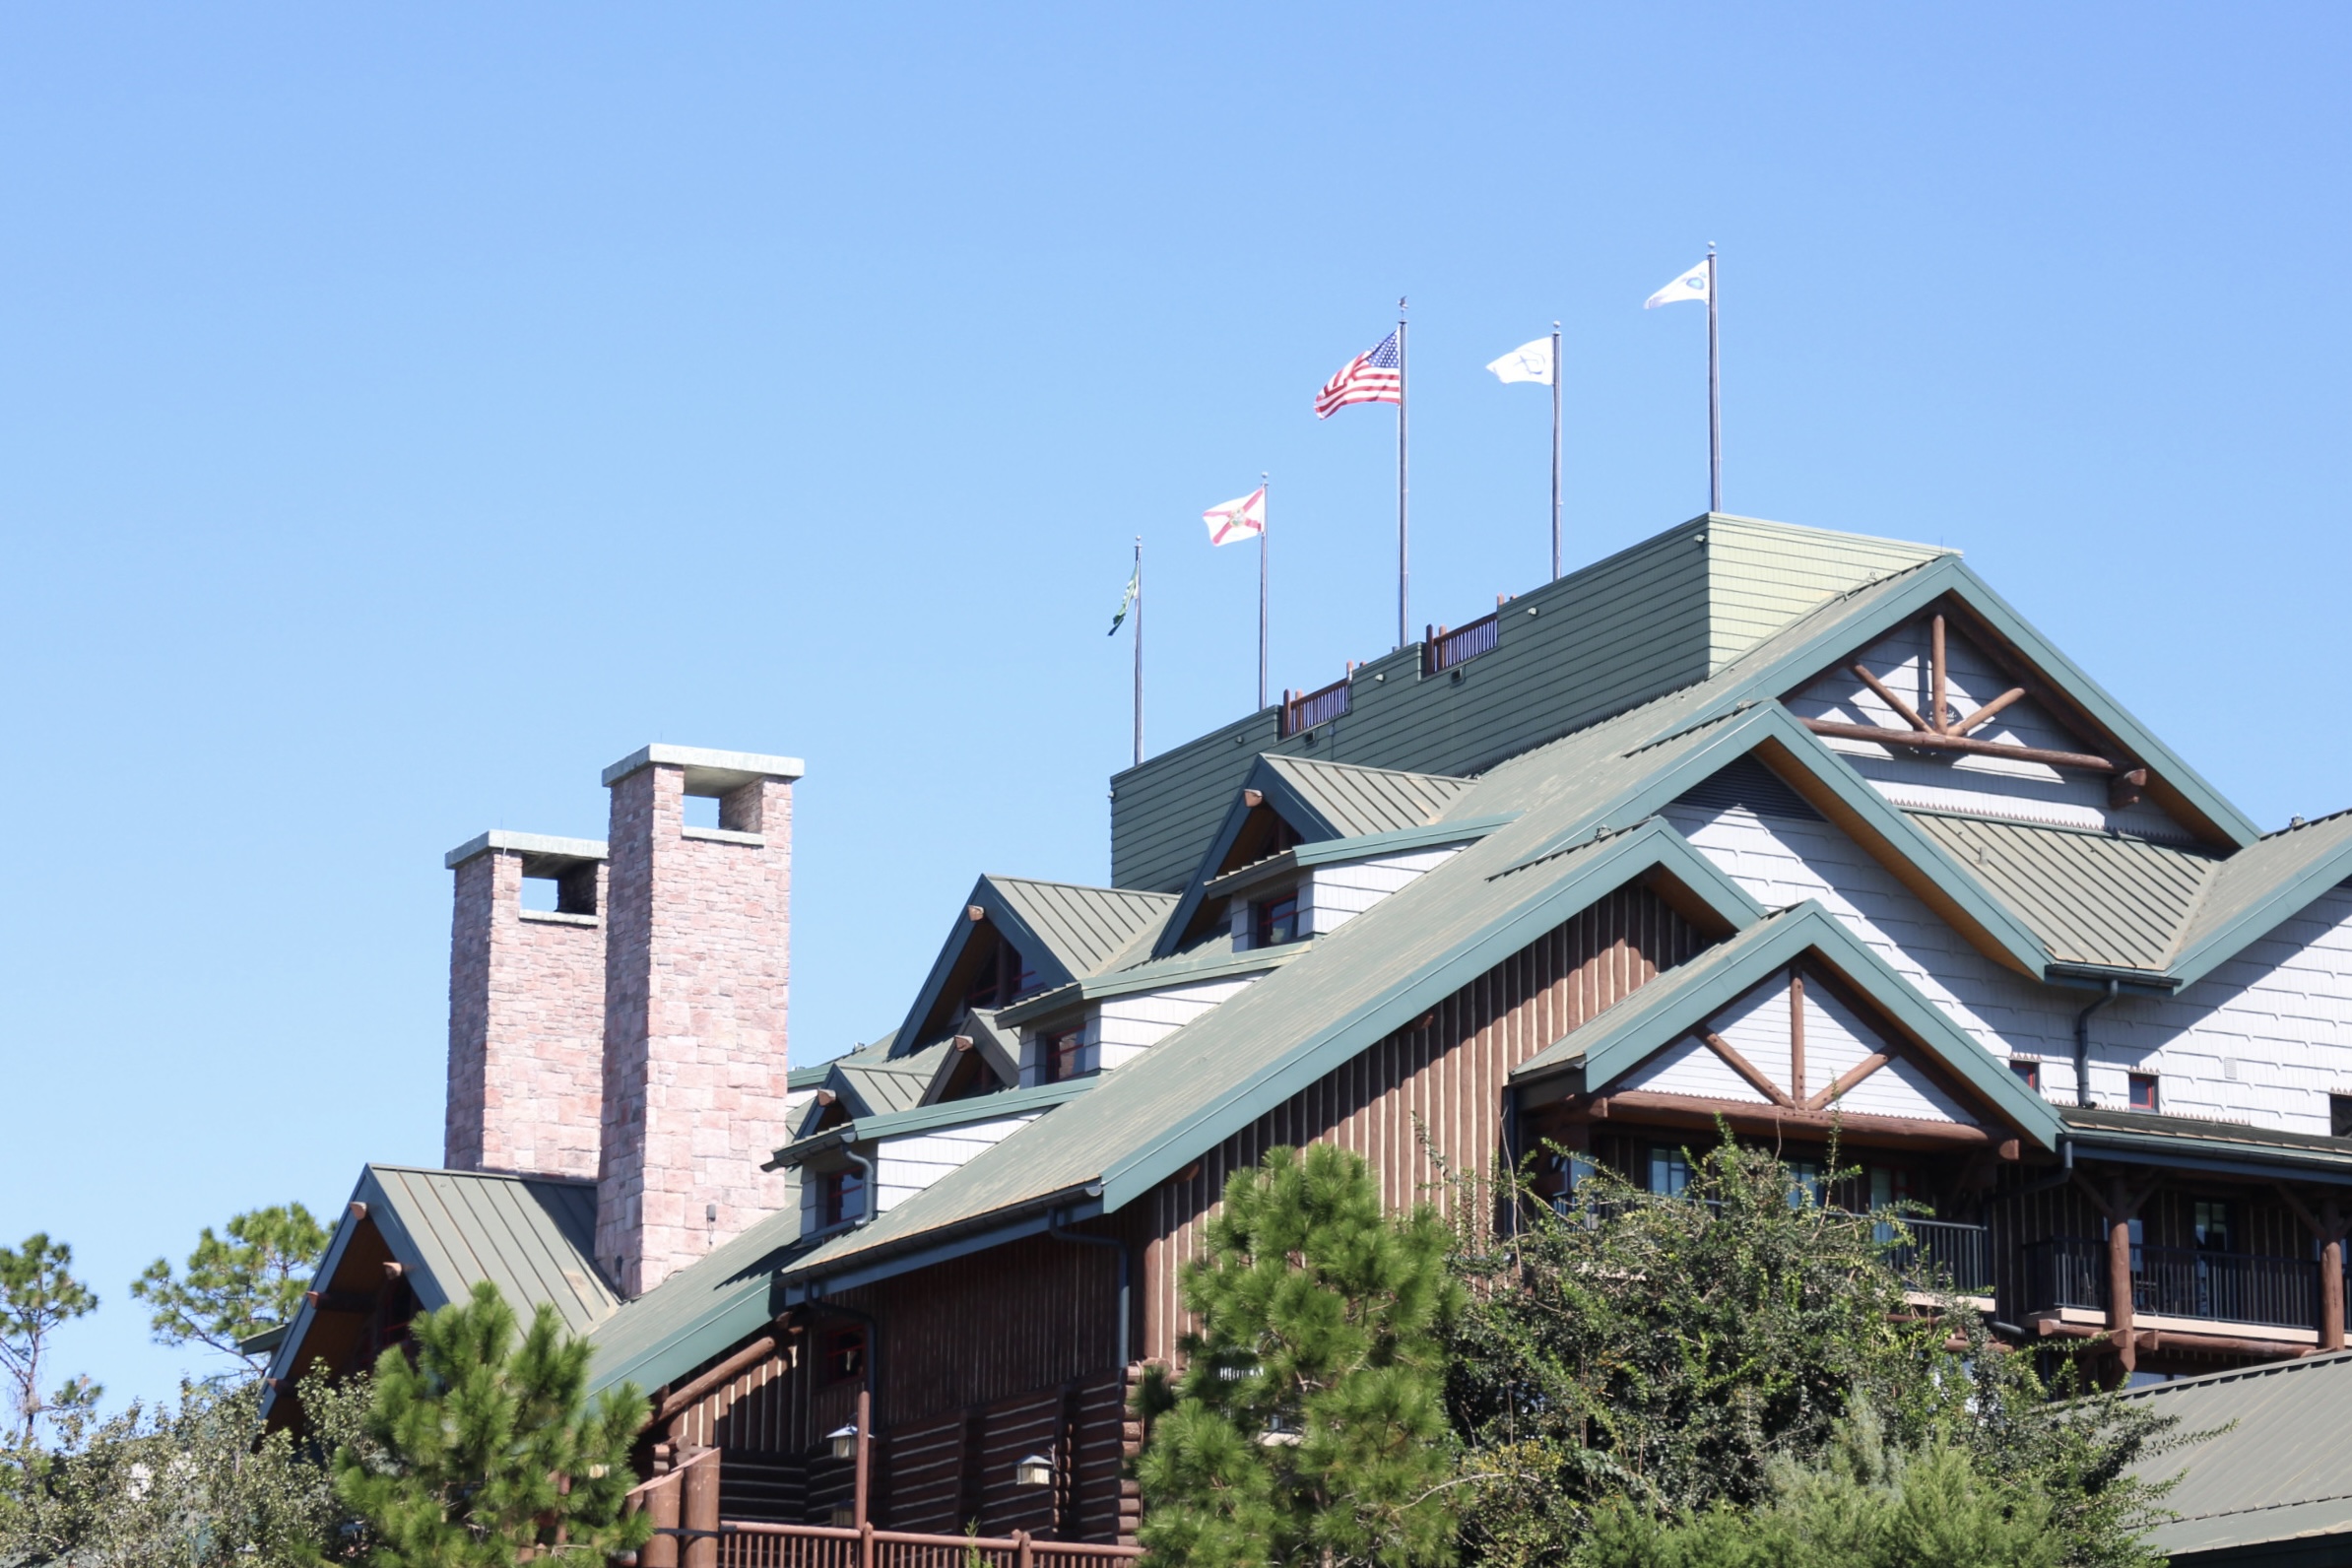 Green roof on the Wilderness Lodge lobby building with chimneys in front of a blue sky